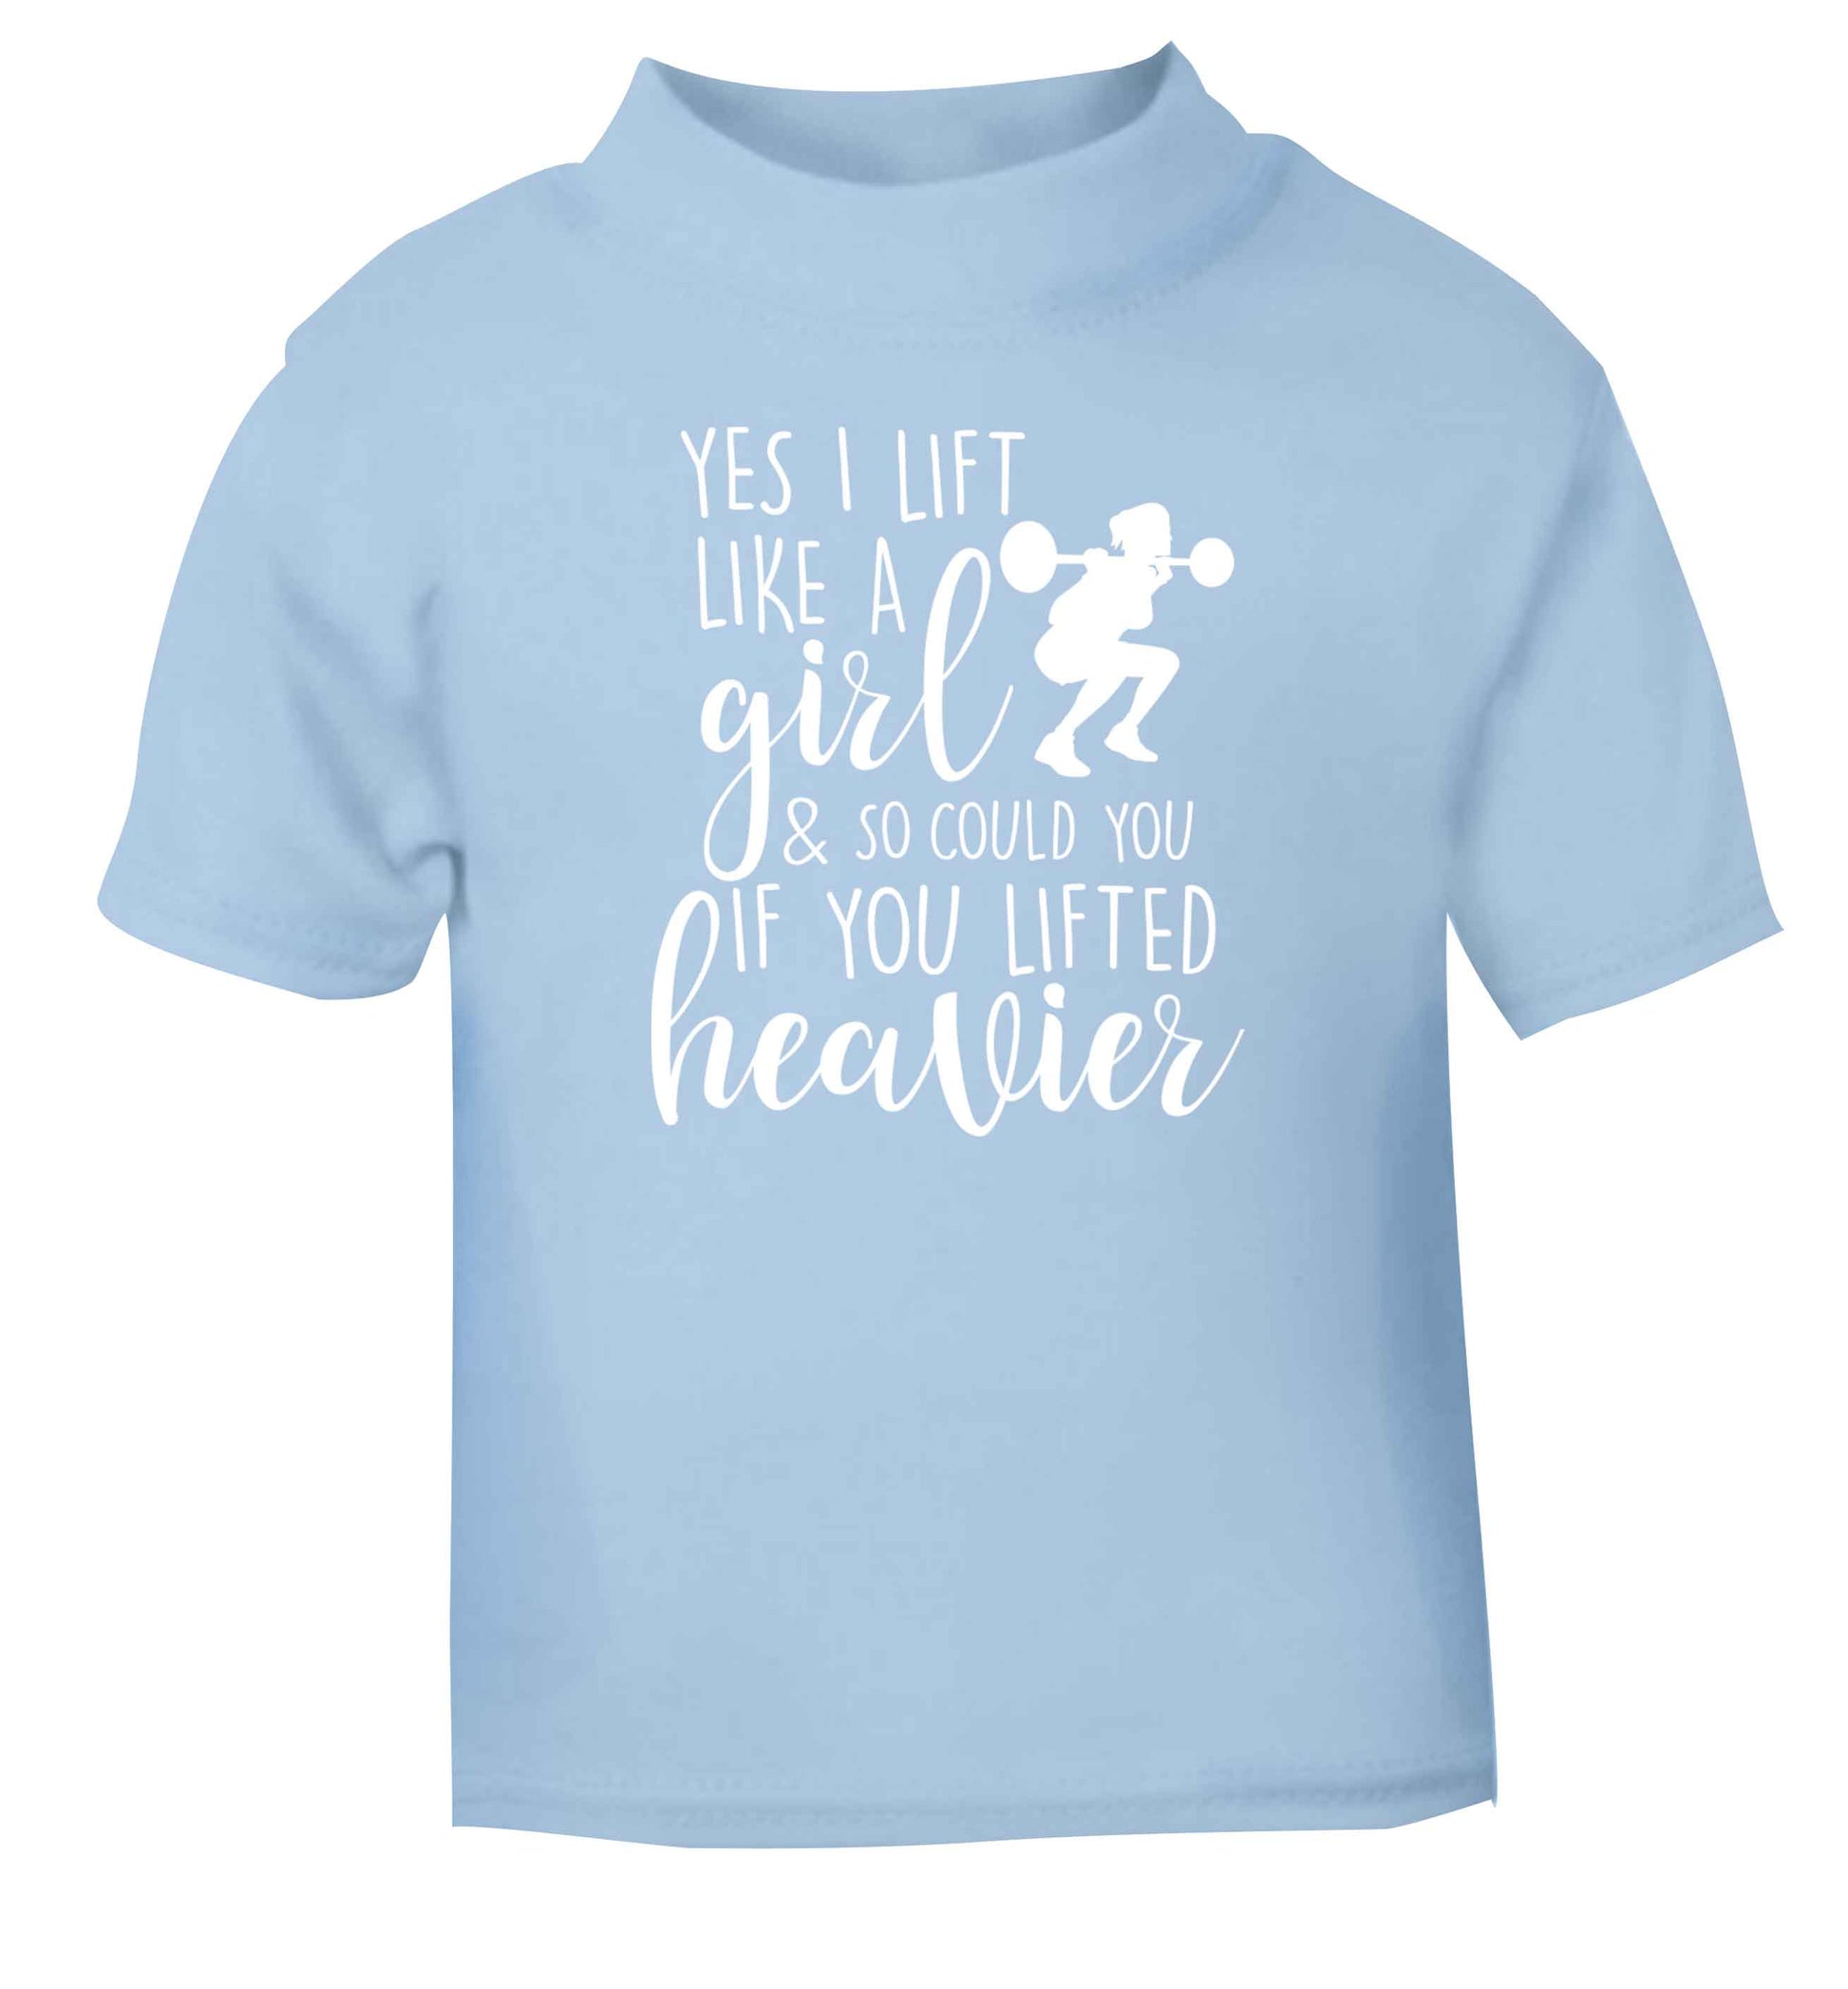 Yes I lift like a girl and so could you if you lifted heavier light blue Baby Toddler Tshirt 2 Years